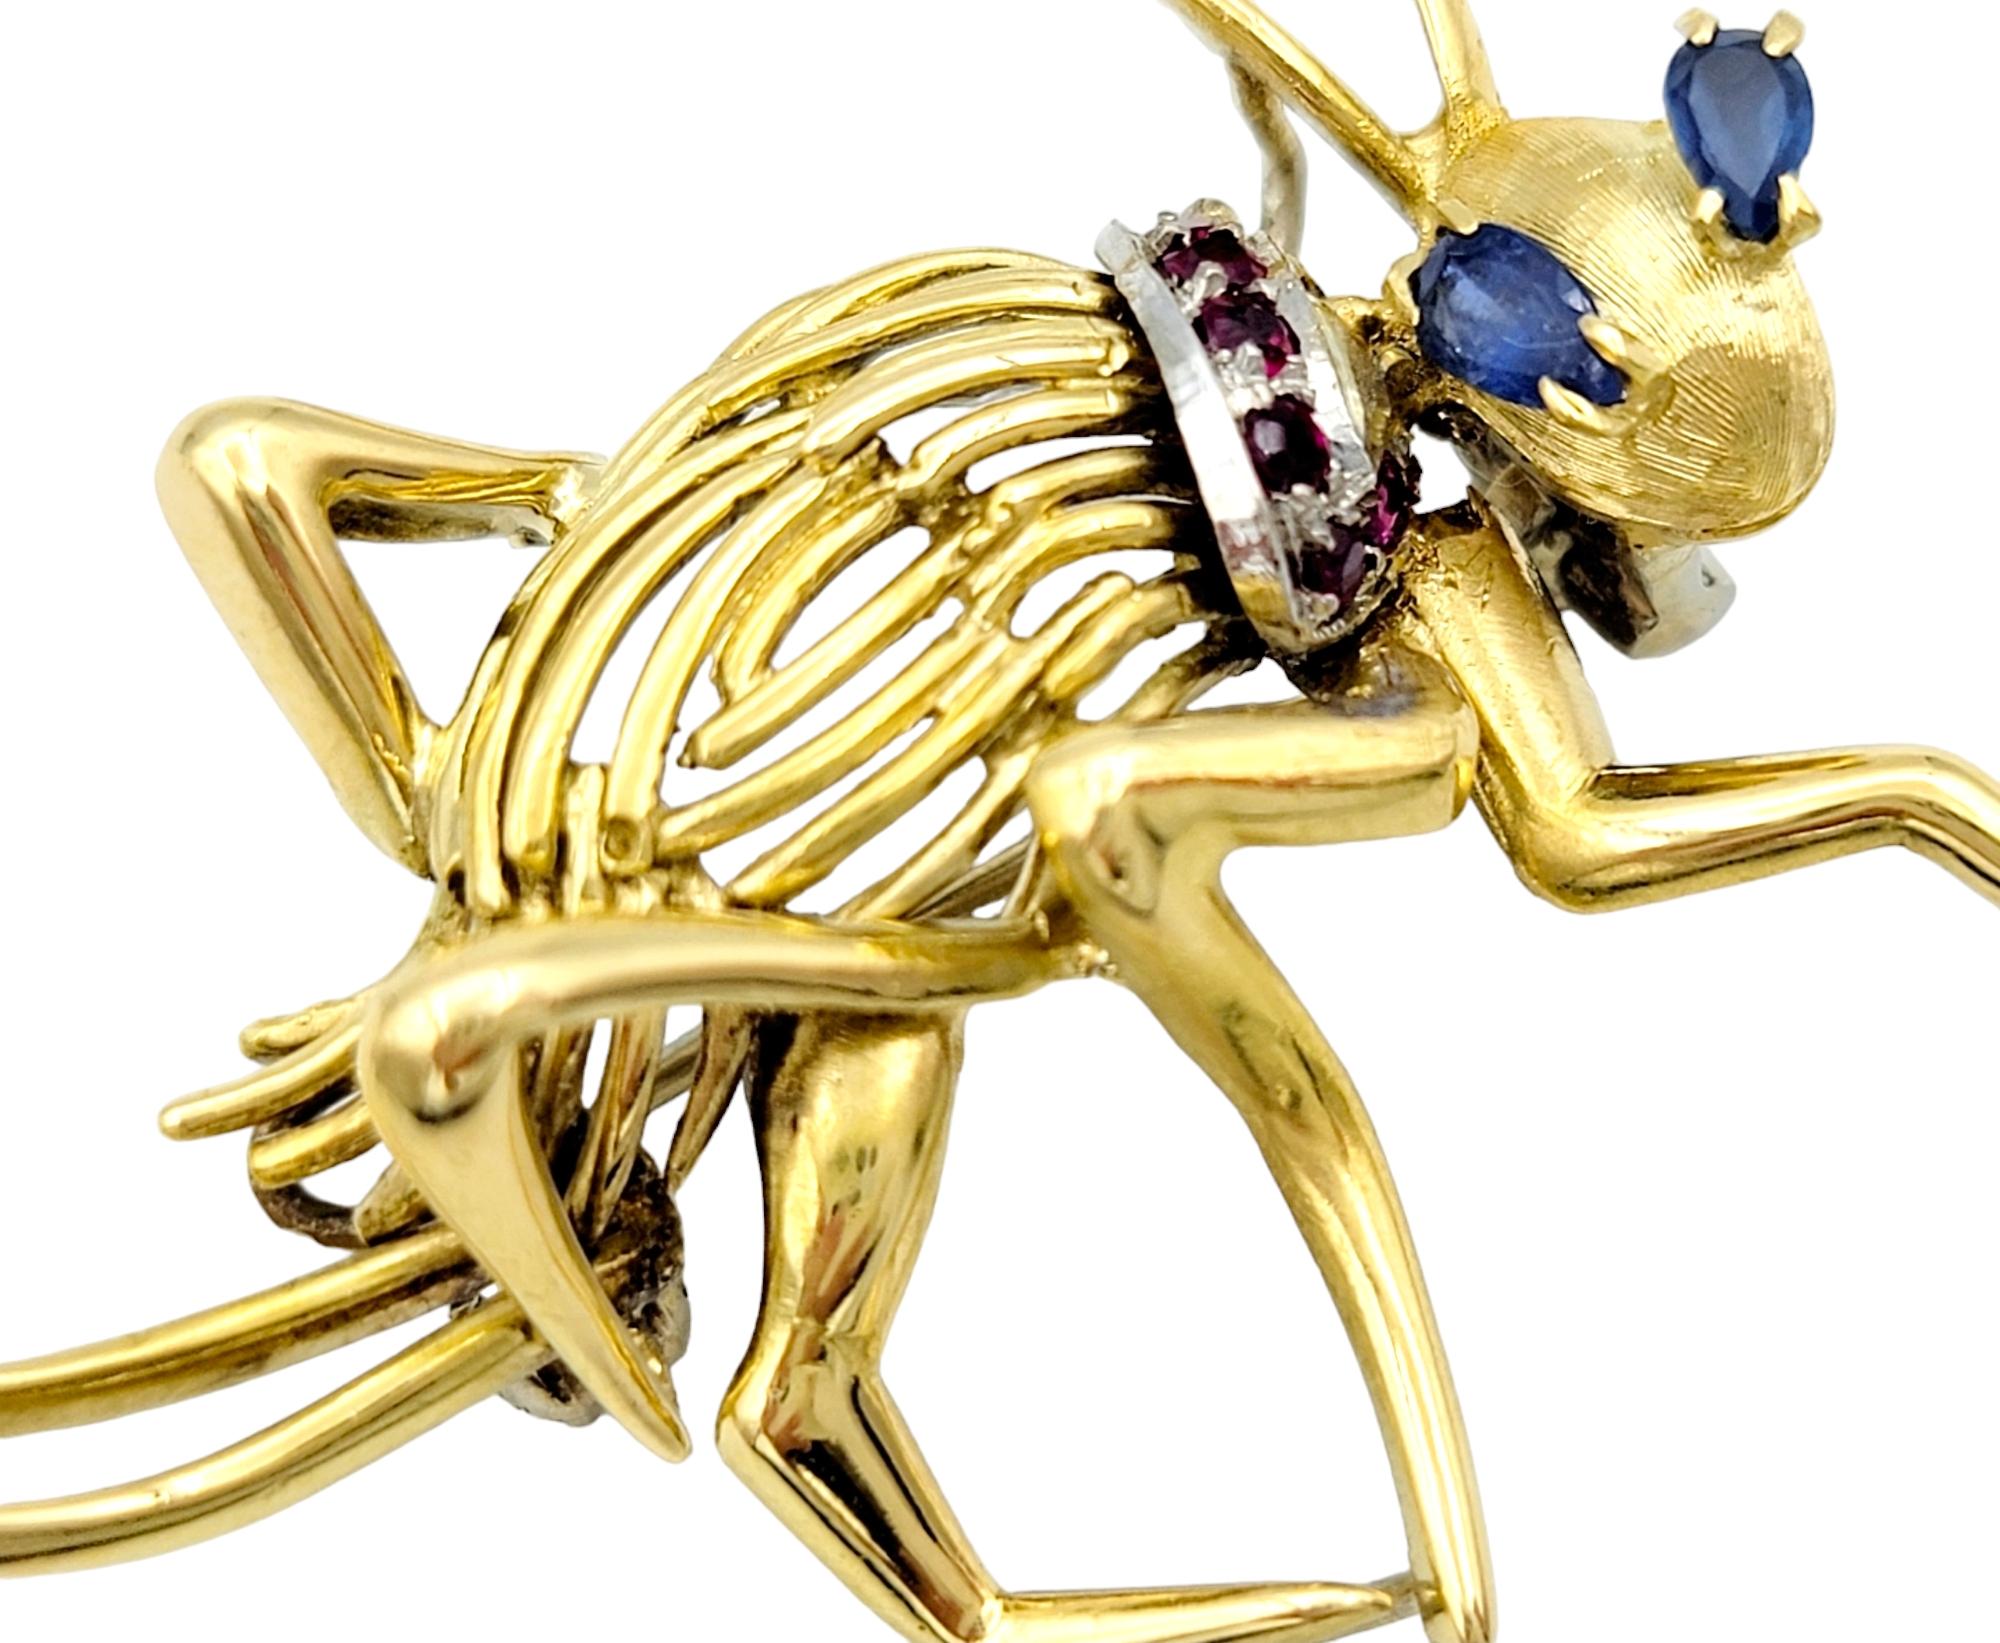 This unique cricket brooch is a dazzling piece made with the timeless appeal of 14 karat yellow gold. The focal point of this brooch is its captivating sapphire eyes. These pear-shaped sapphires, carefully chosen for their deep, velvety blue hue,